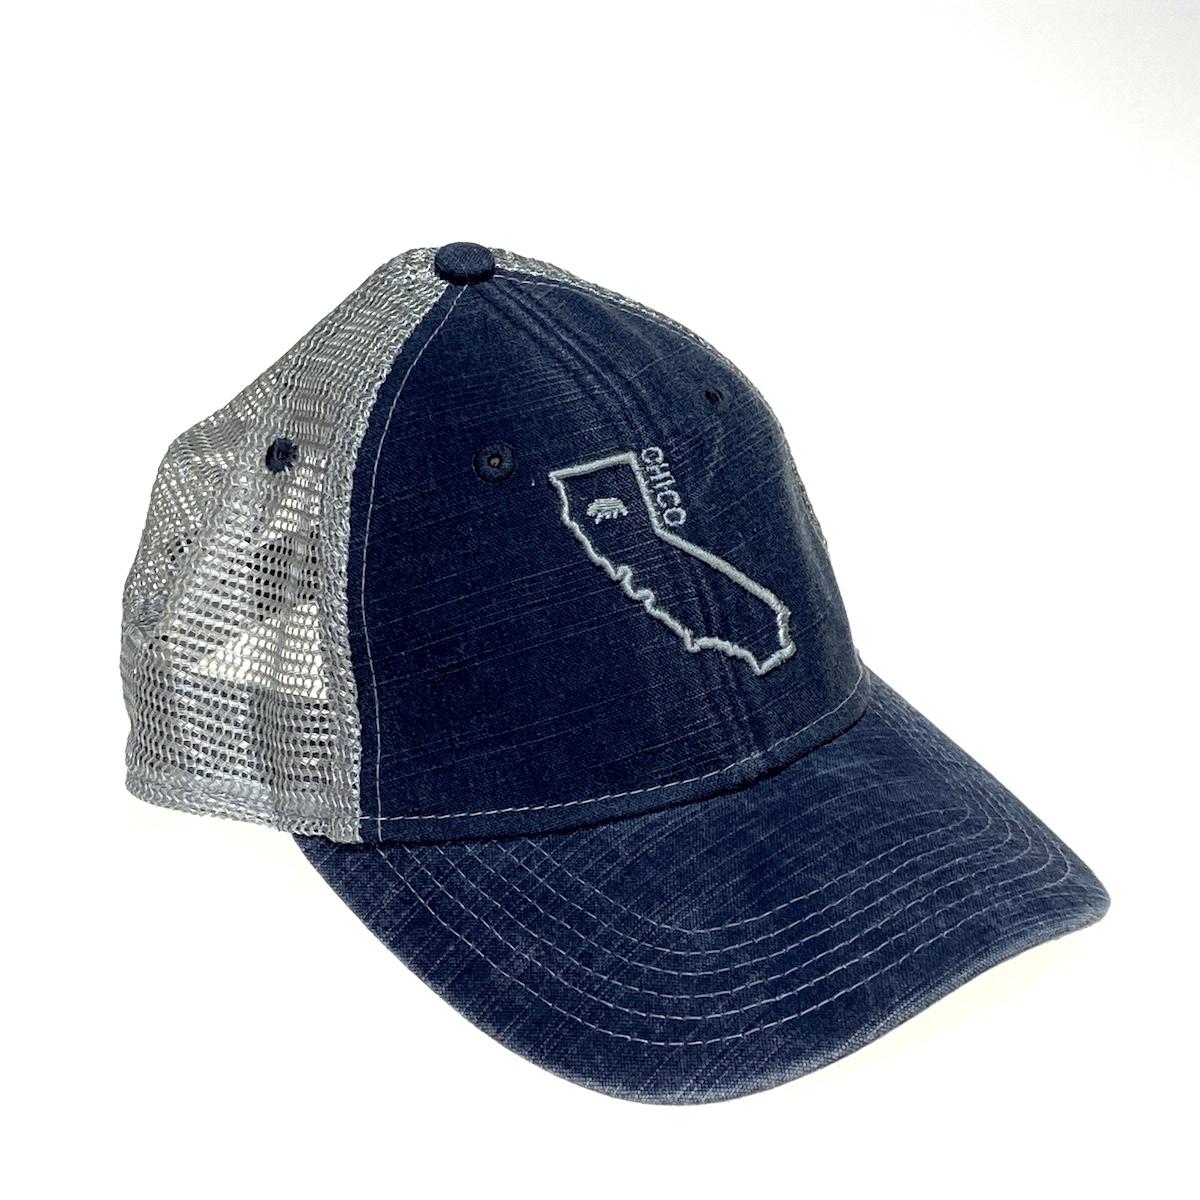 California Outline Chico Hat NVY/GRY   